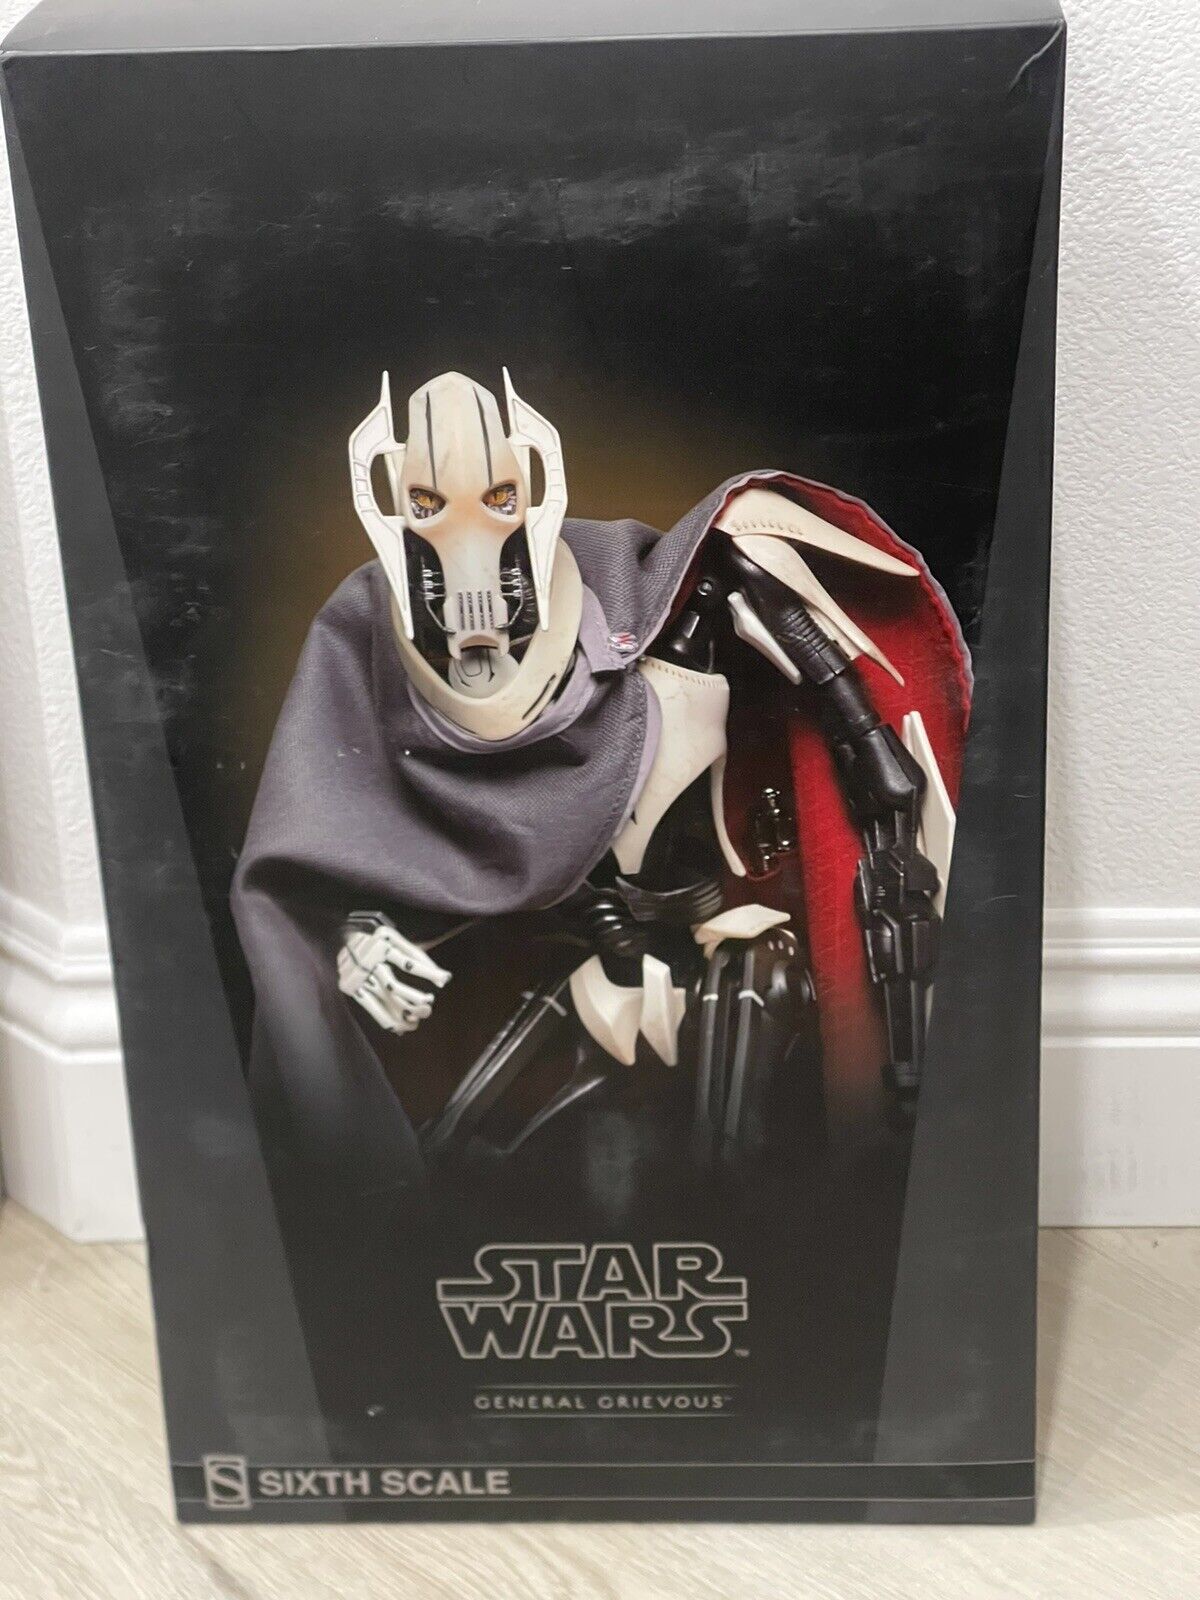 General Grievous 1/6 Scale (Star Wars, Sideshow) Open Box